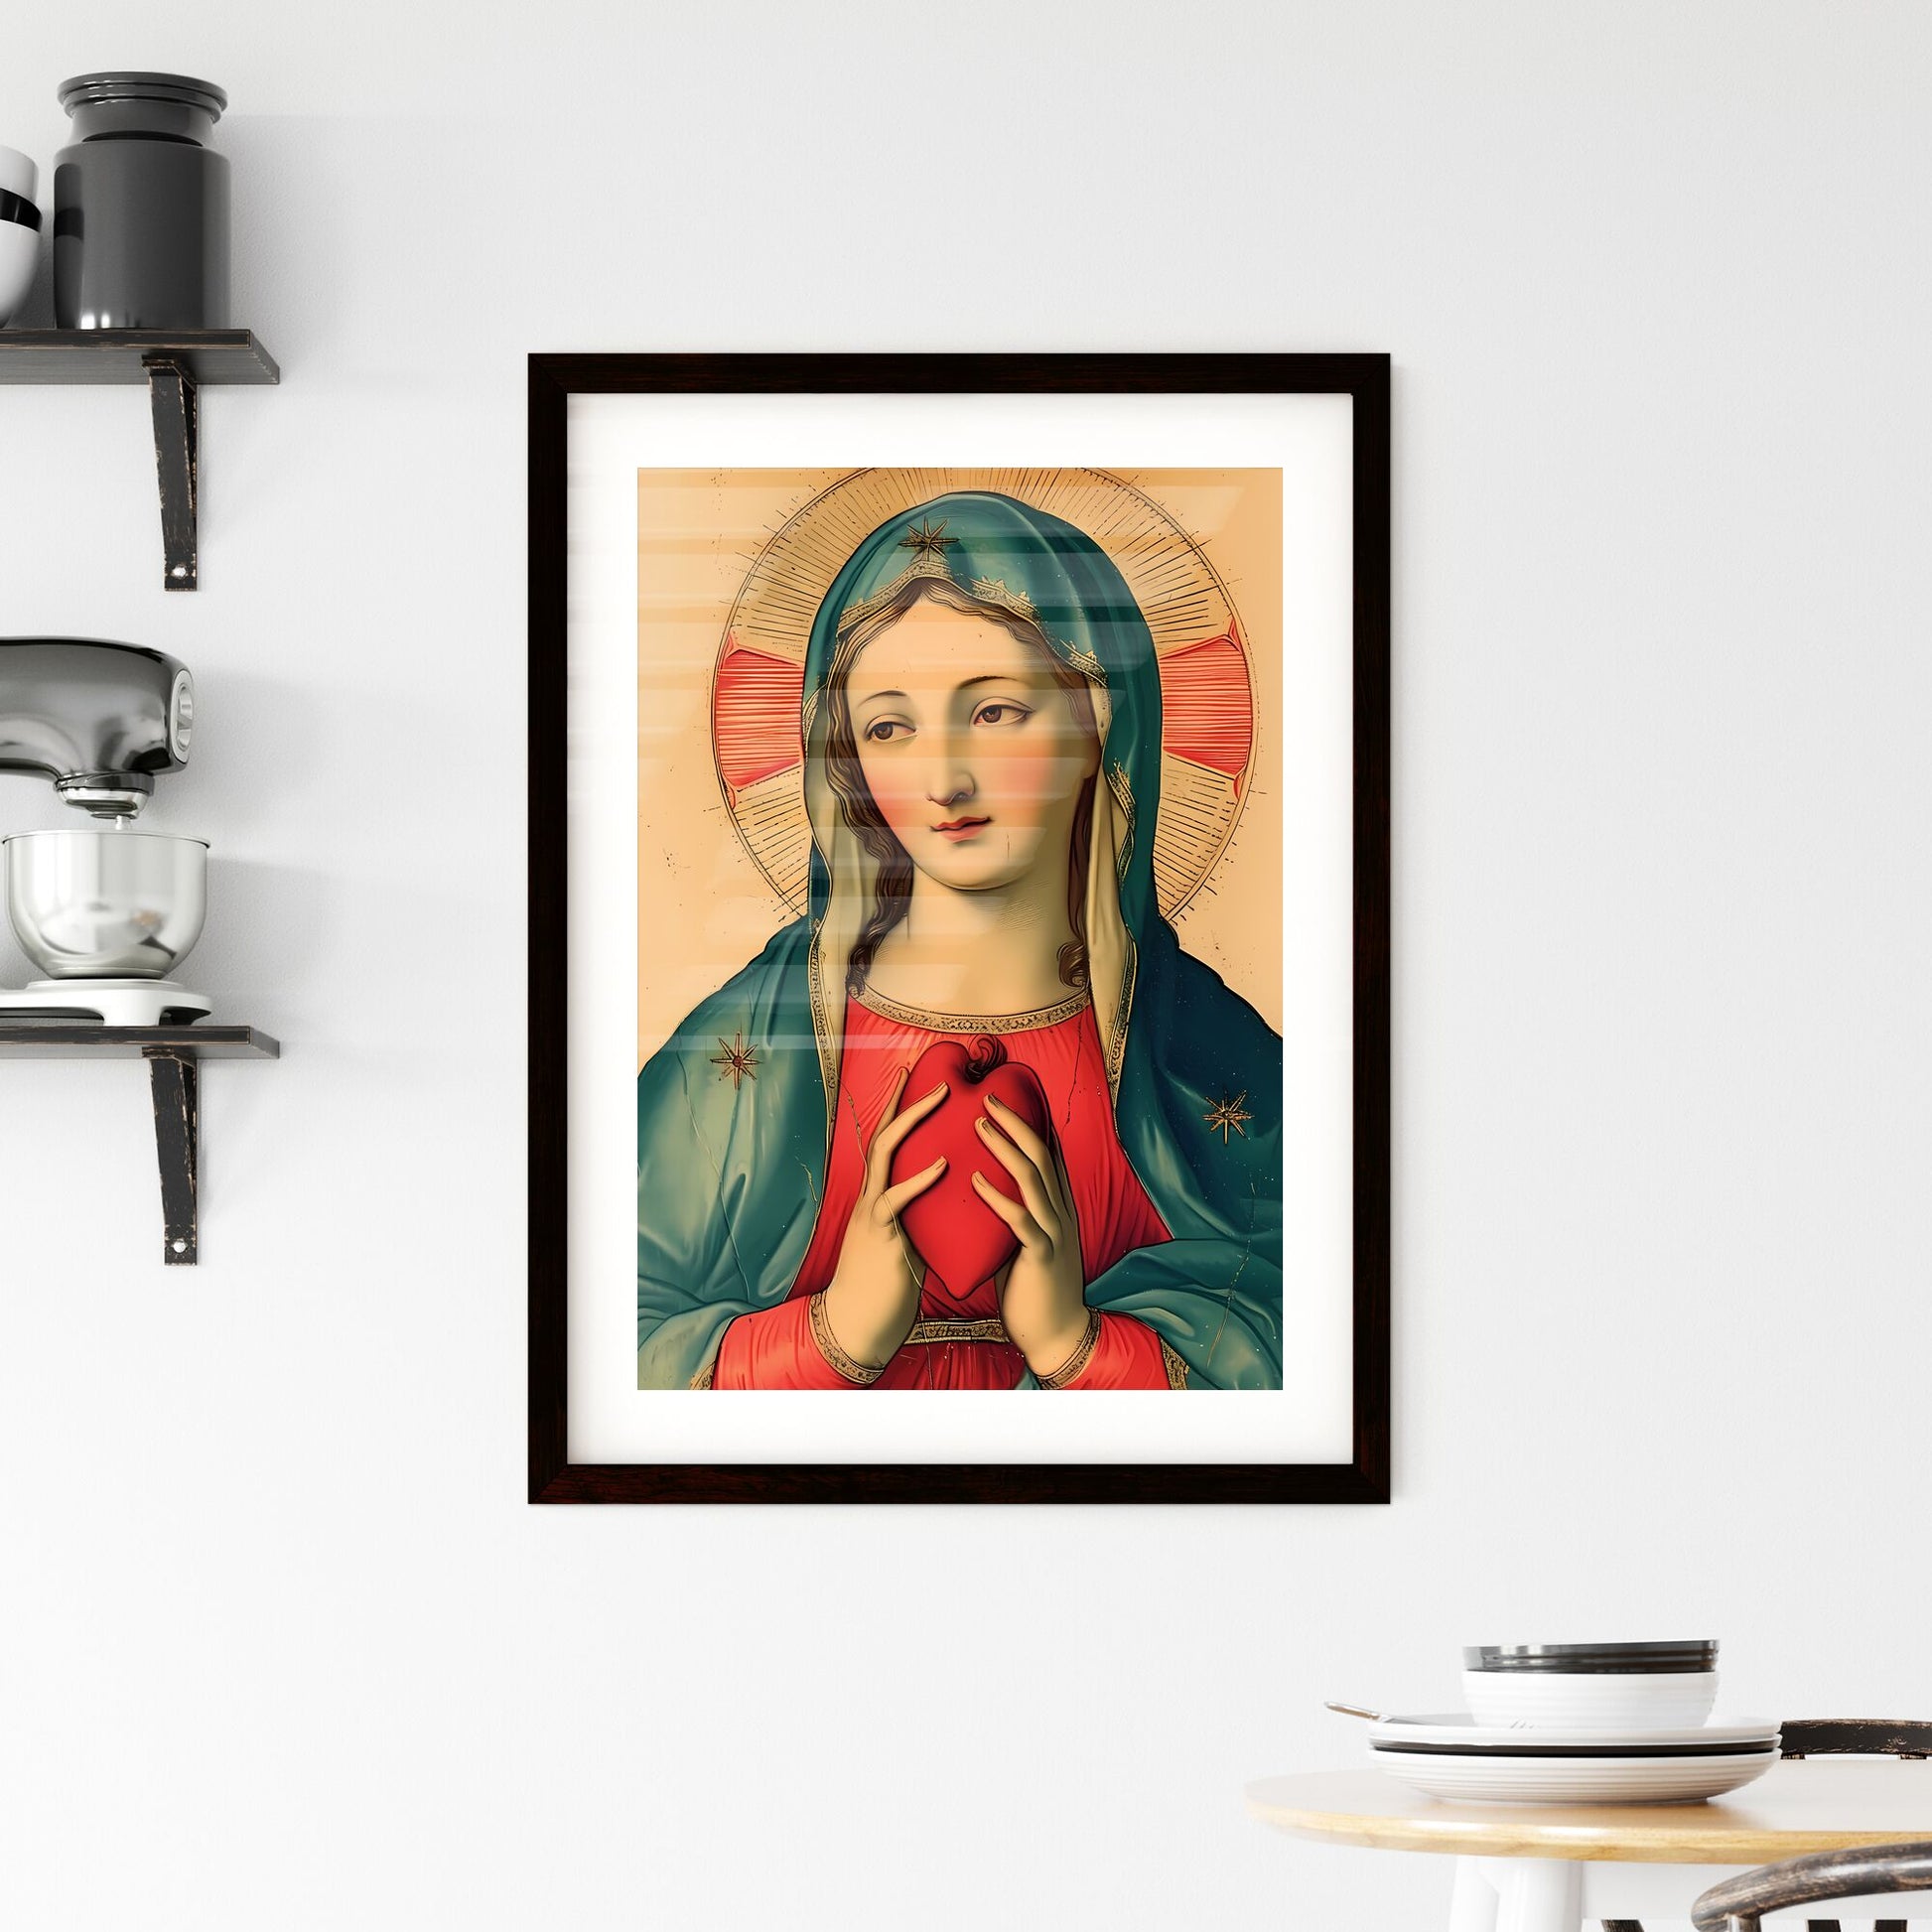 Captivating Catholic image of the Holy Mary - Art print of a painting of a woman holding a heart Default Title